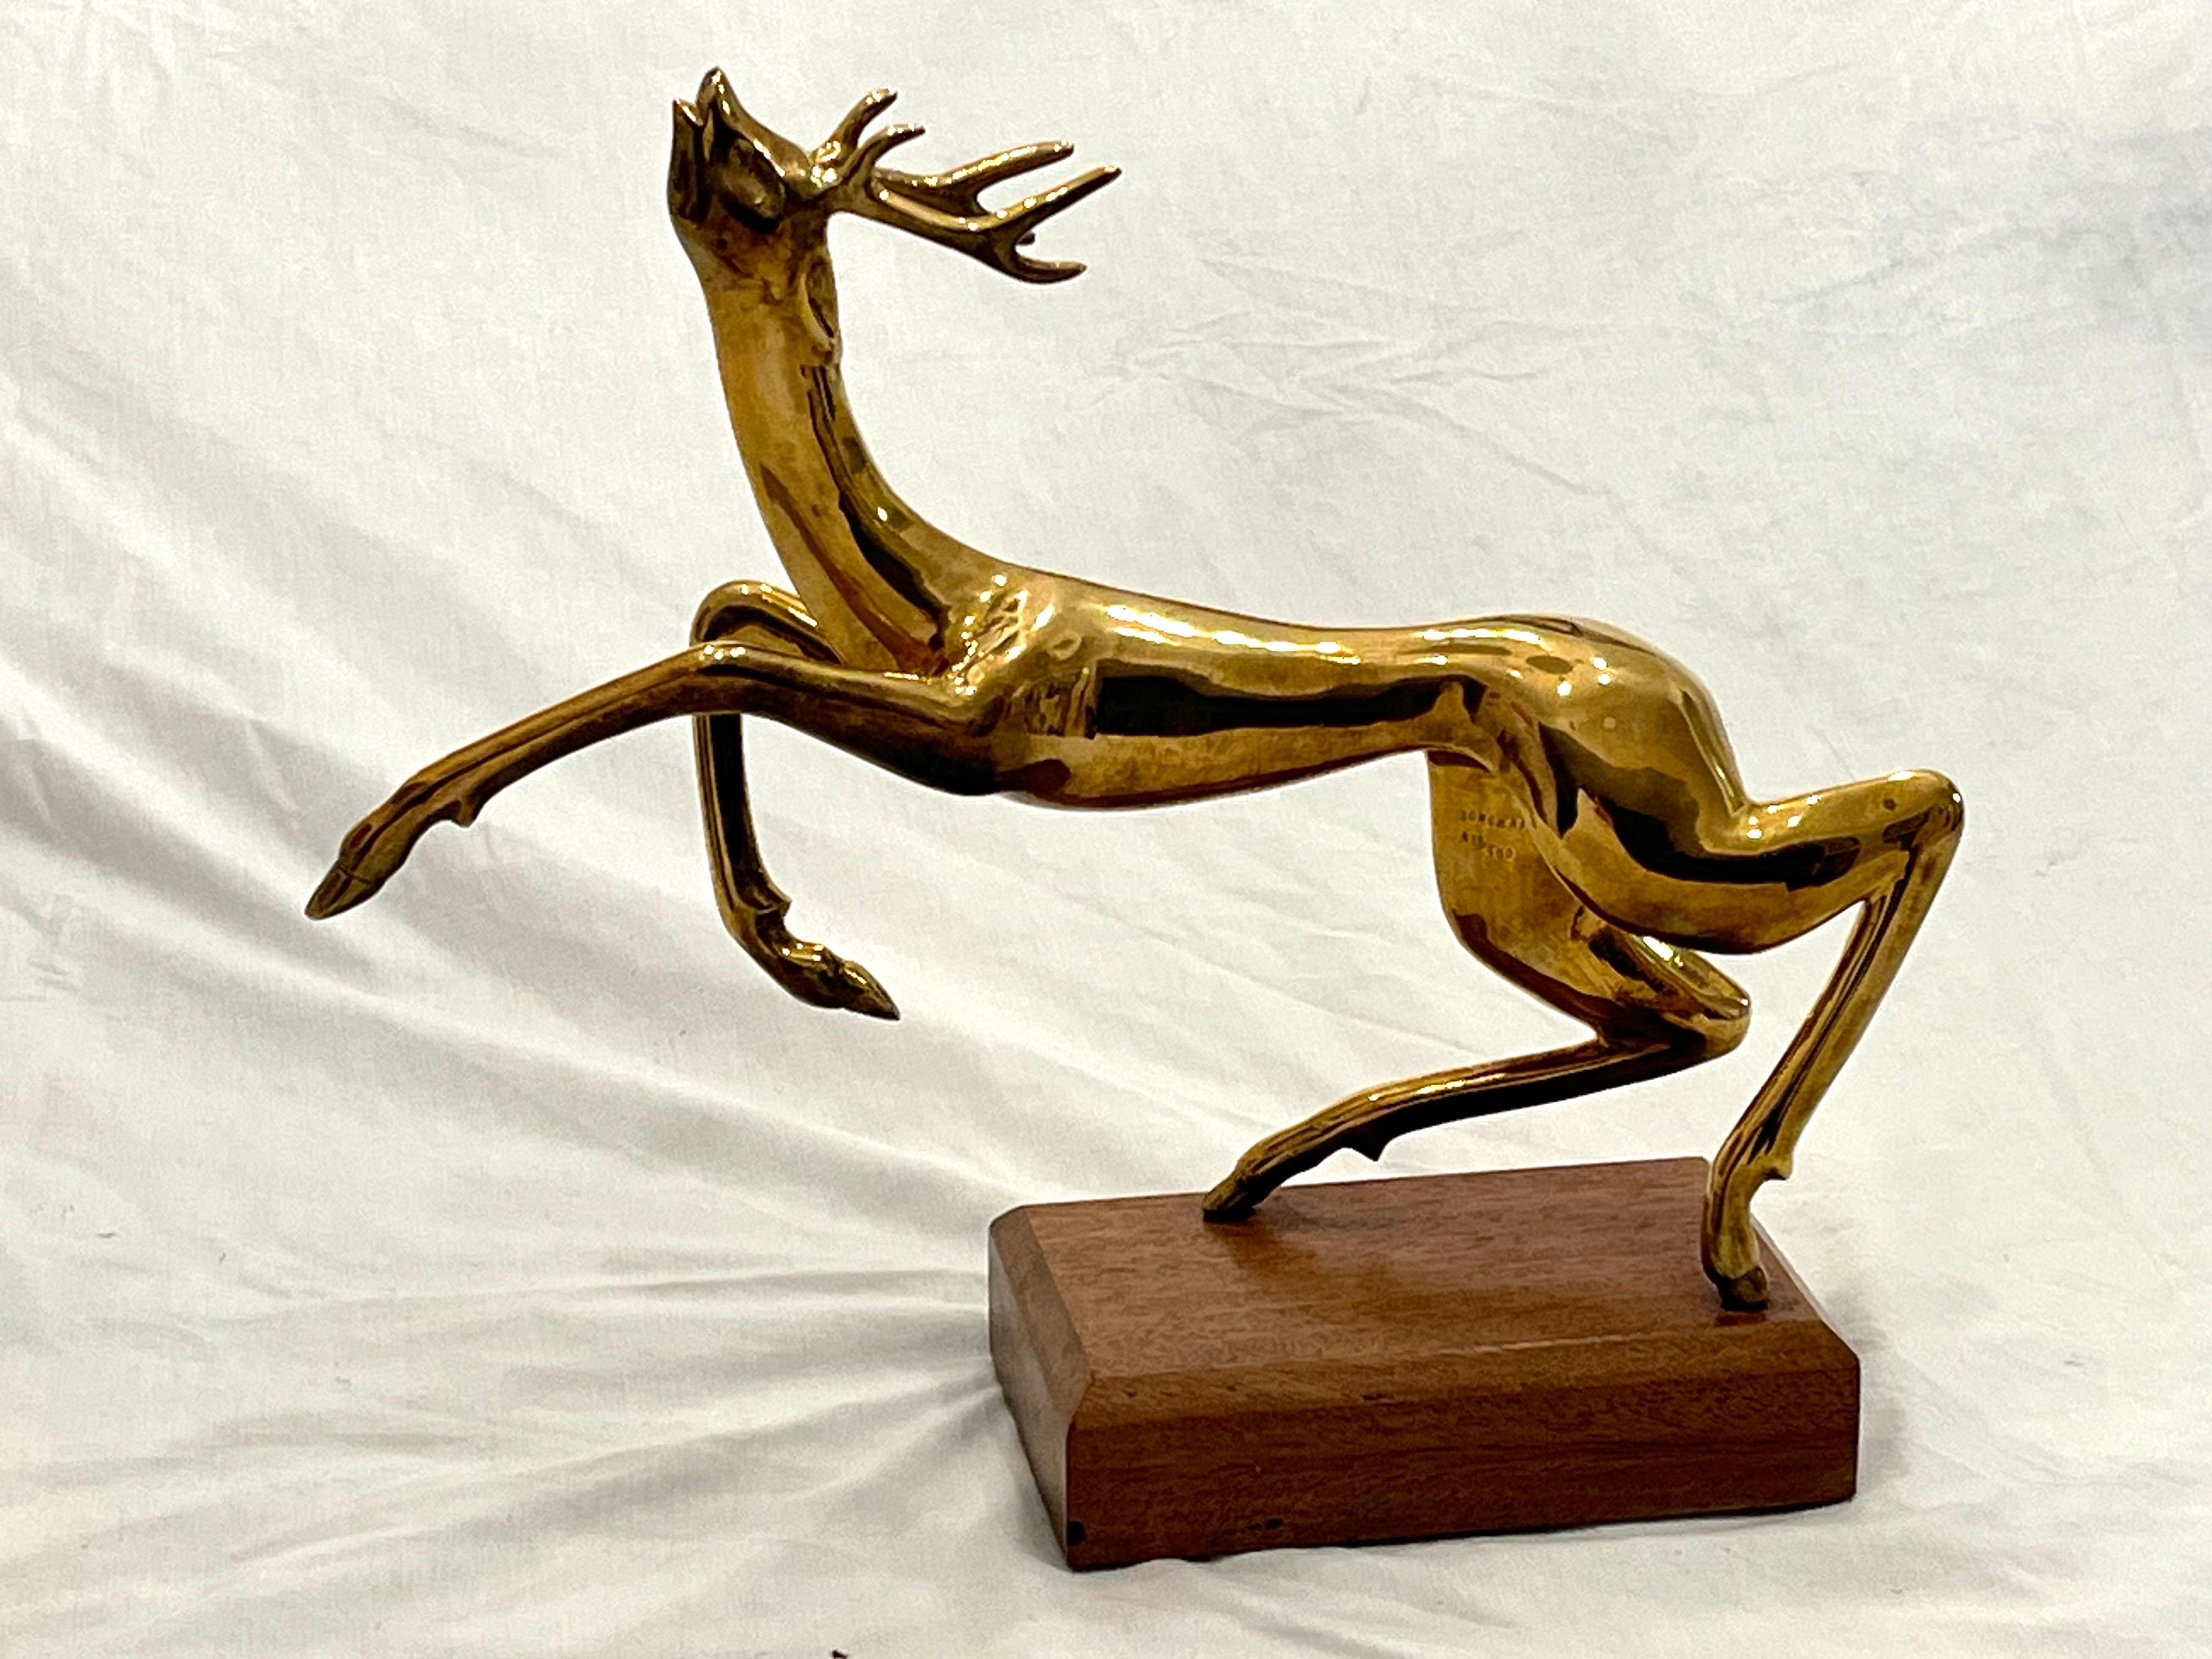 Vintage Thai Somchai Hattakitkosol Signed Solid Bronze Sculpture of Leaping Deer For Sale 8